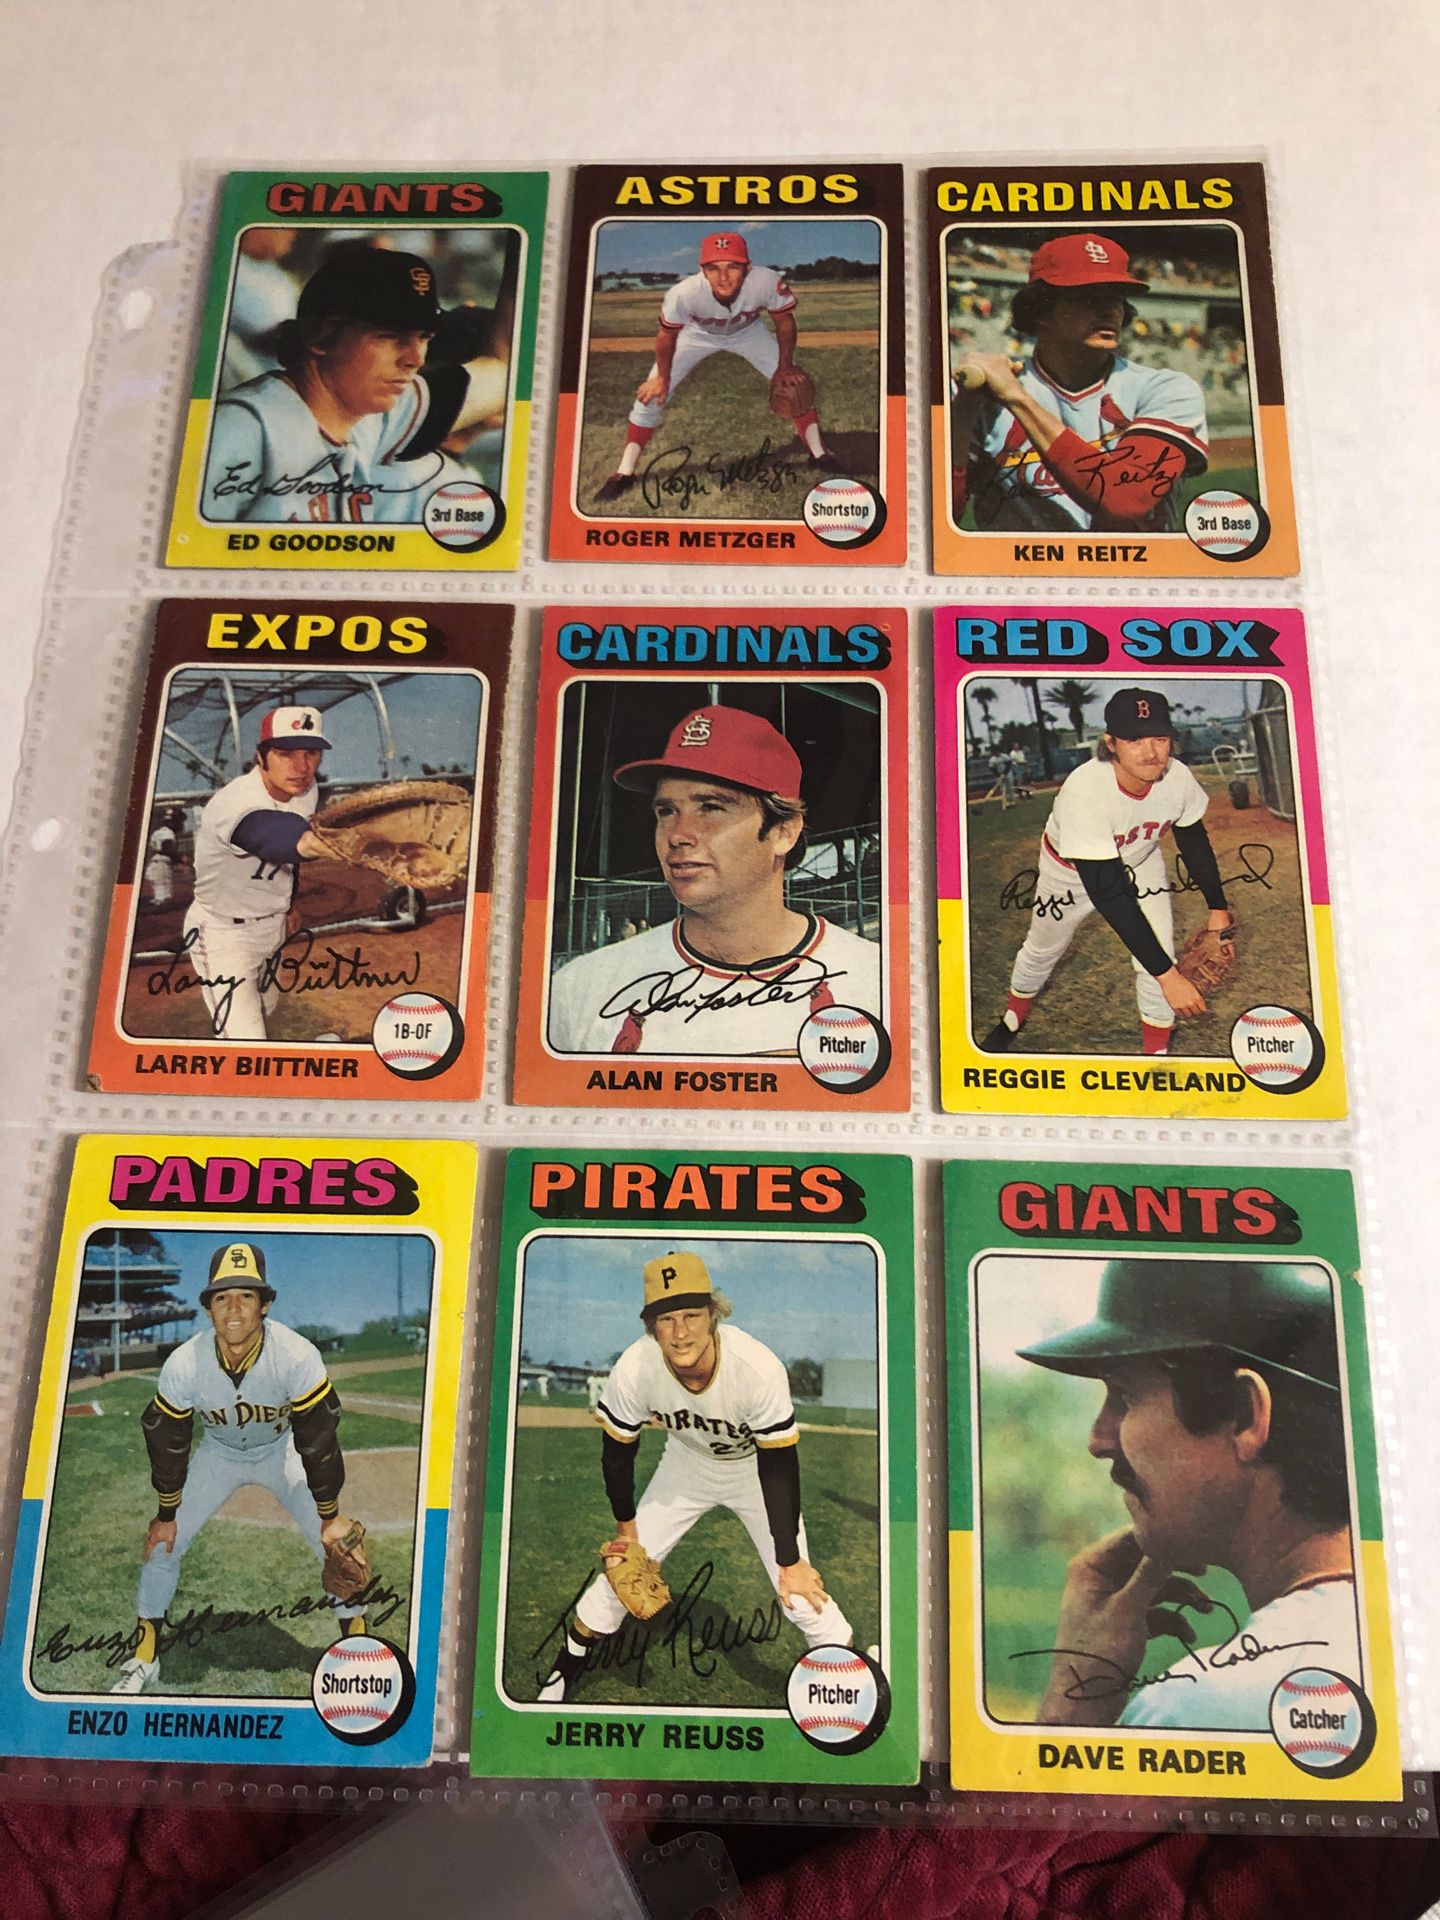 Beautiful 1975 topps baseball card lot #1 of 18 cards all for only $4